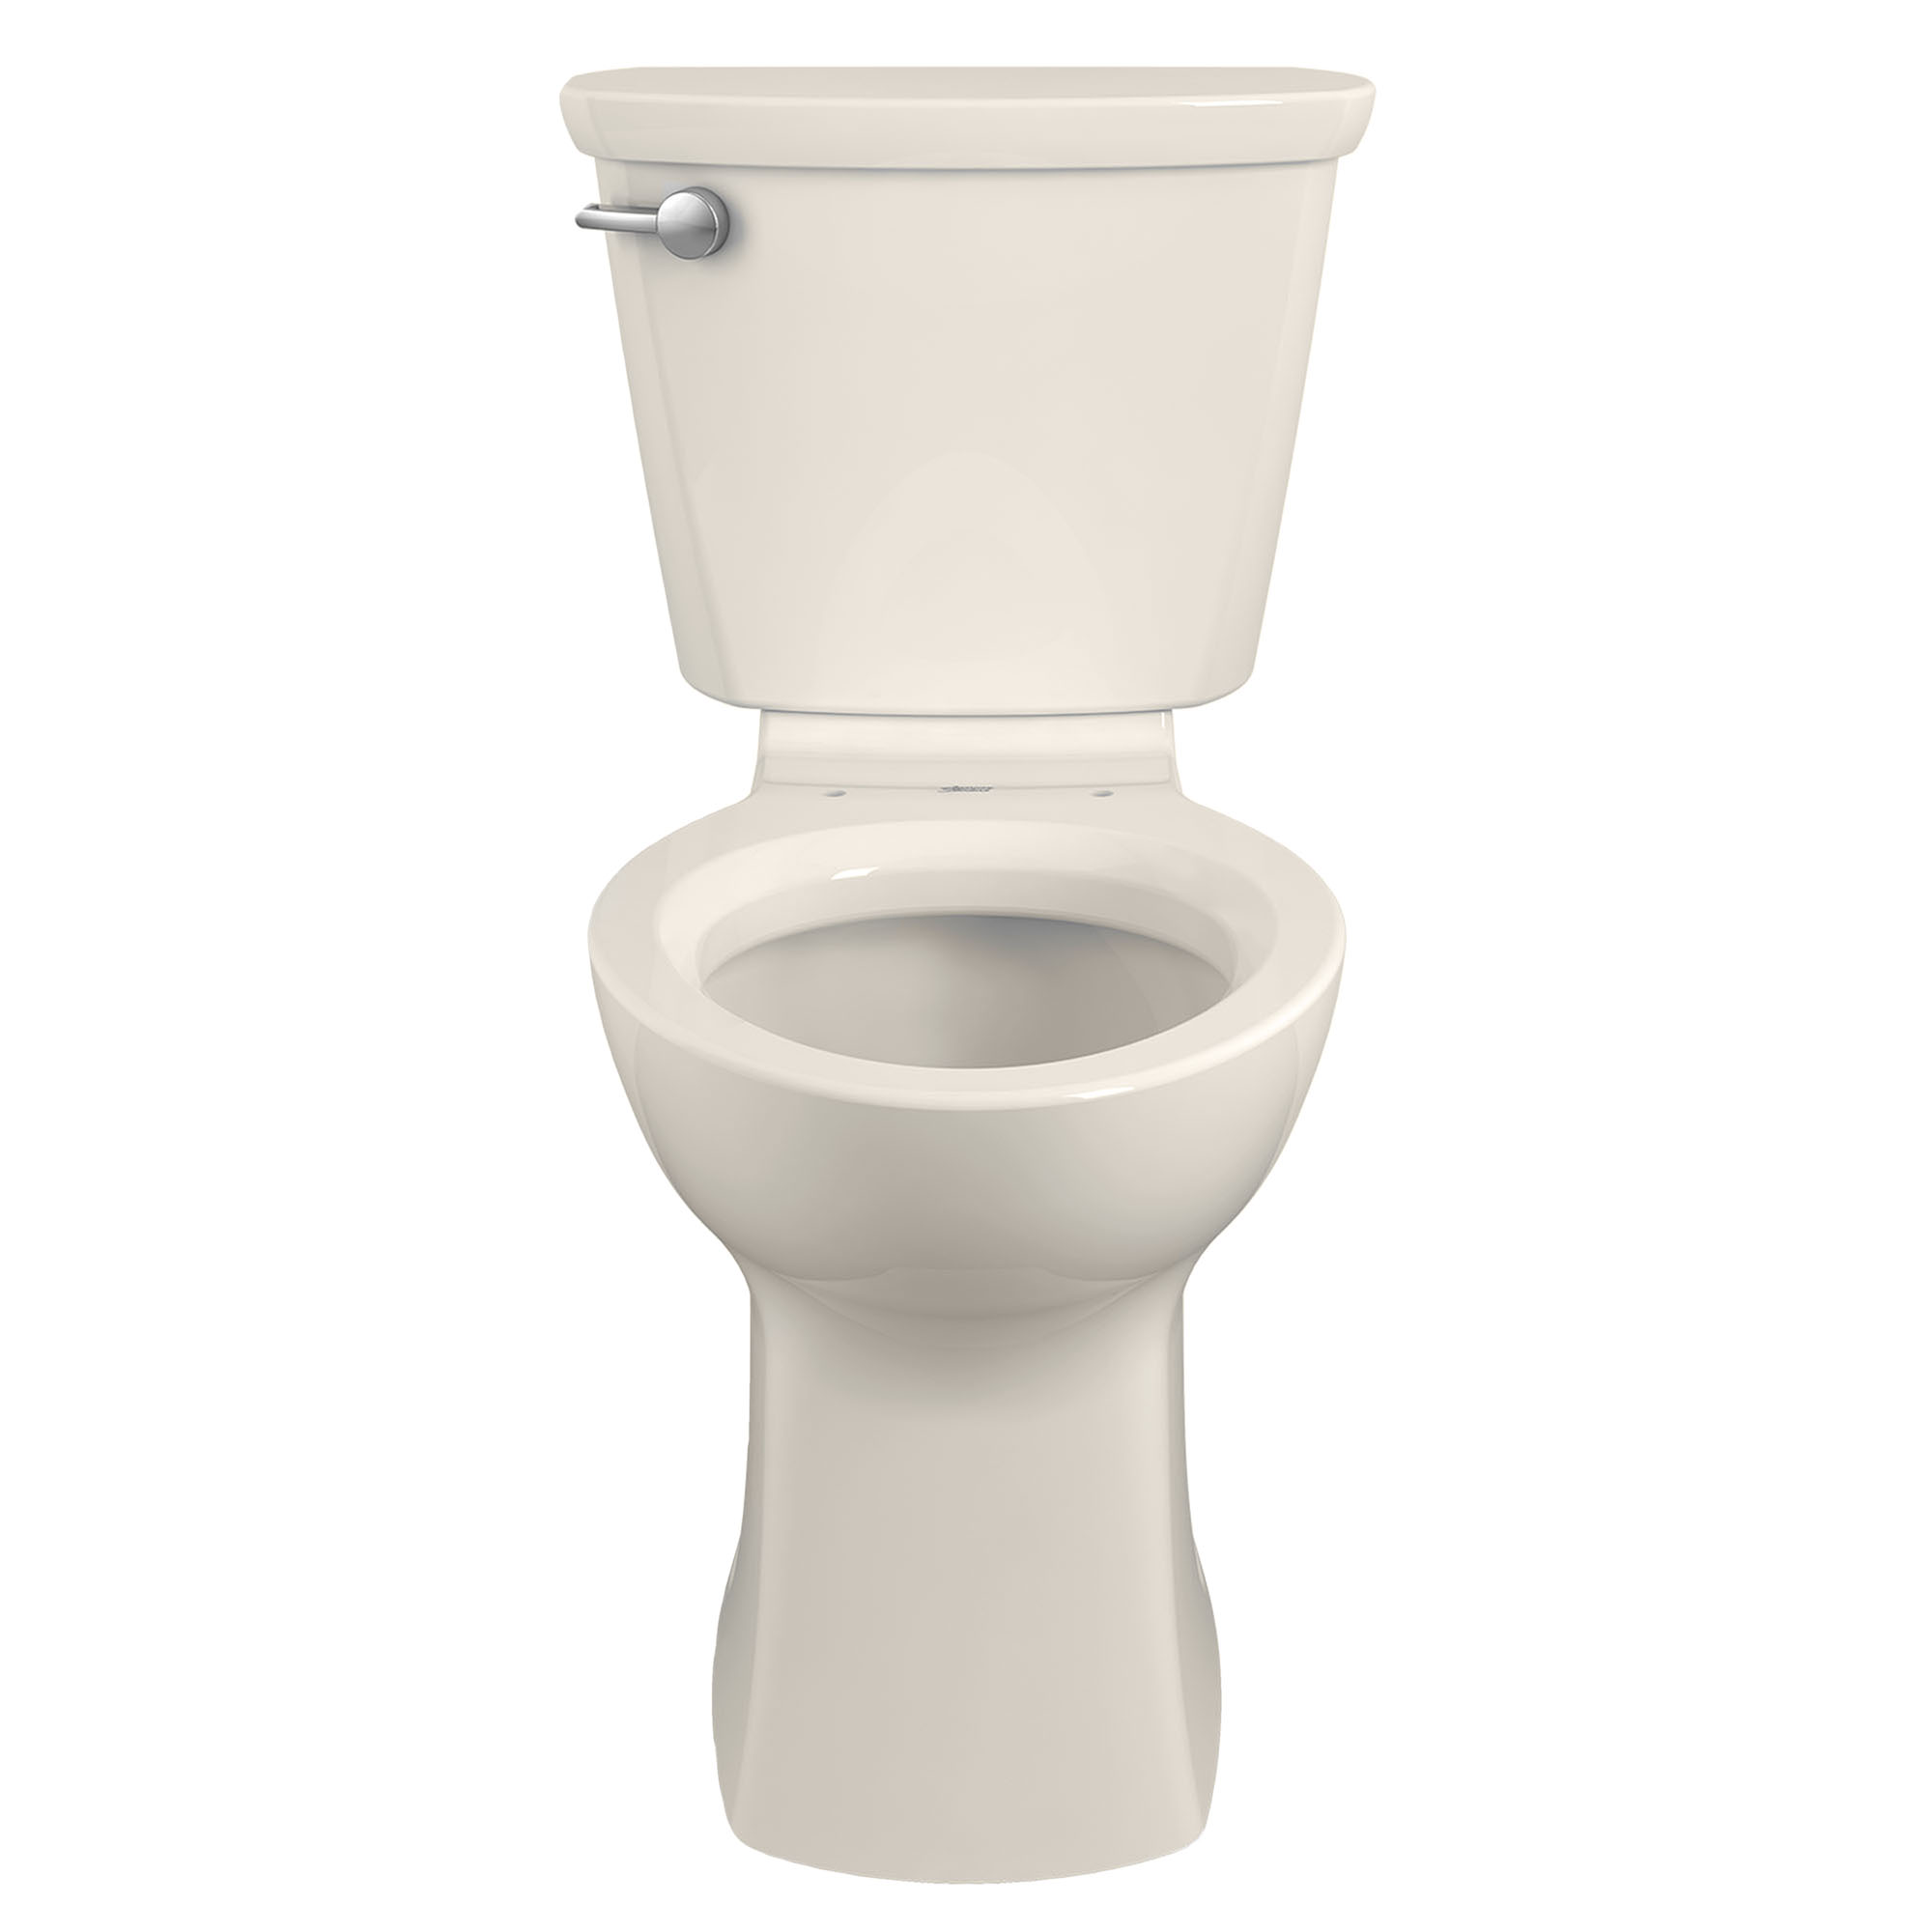 Cadet™ PRO Two-Piece 1.6 gpf/6.0 Lpf  Standard Height Elongated 10-Inch Rough Toilet Less Seat